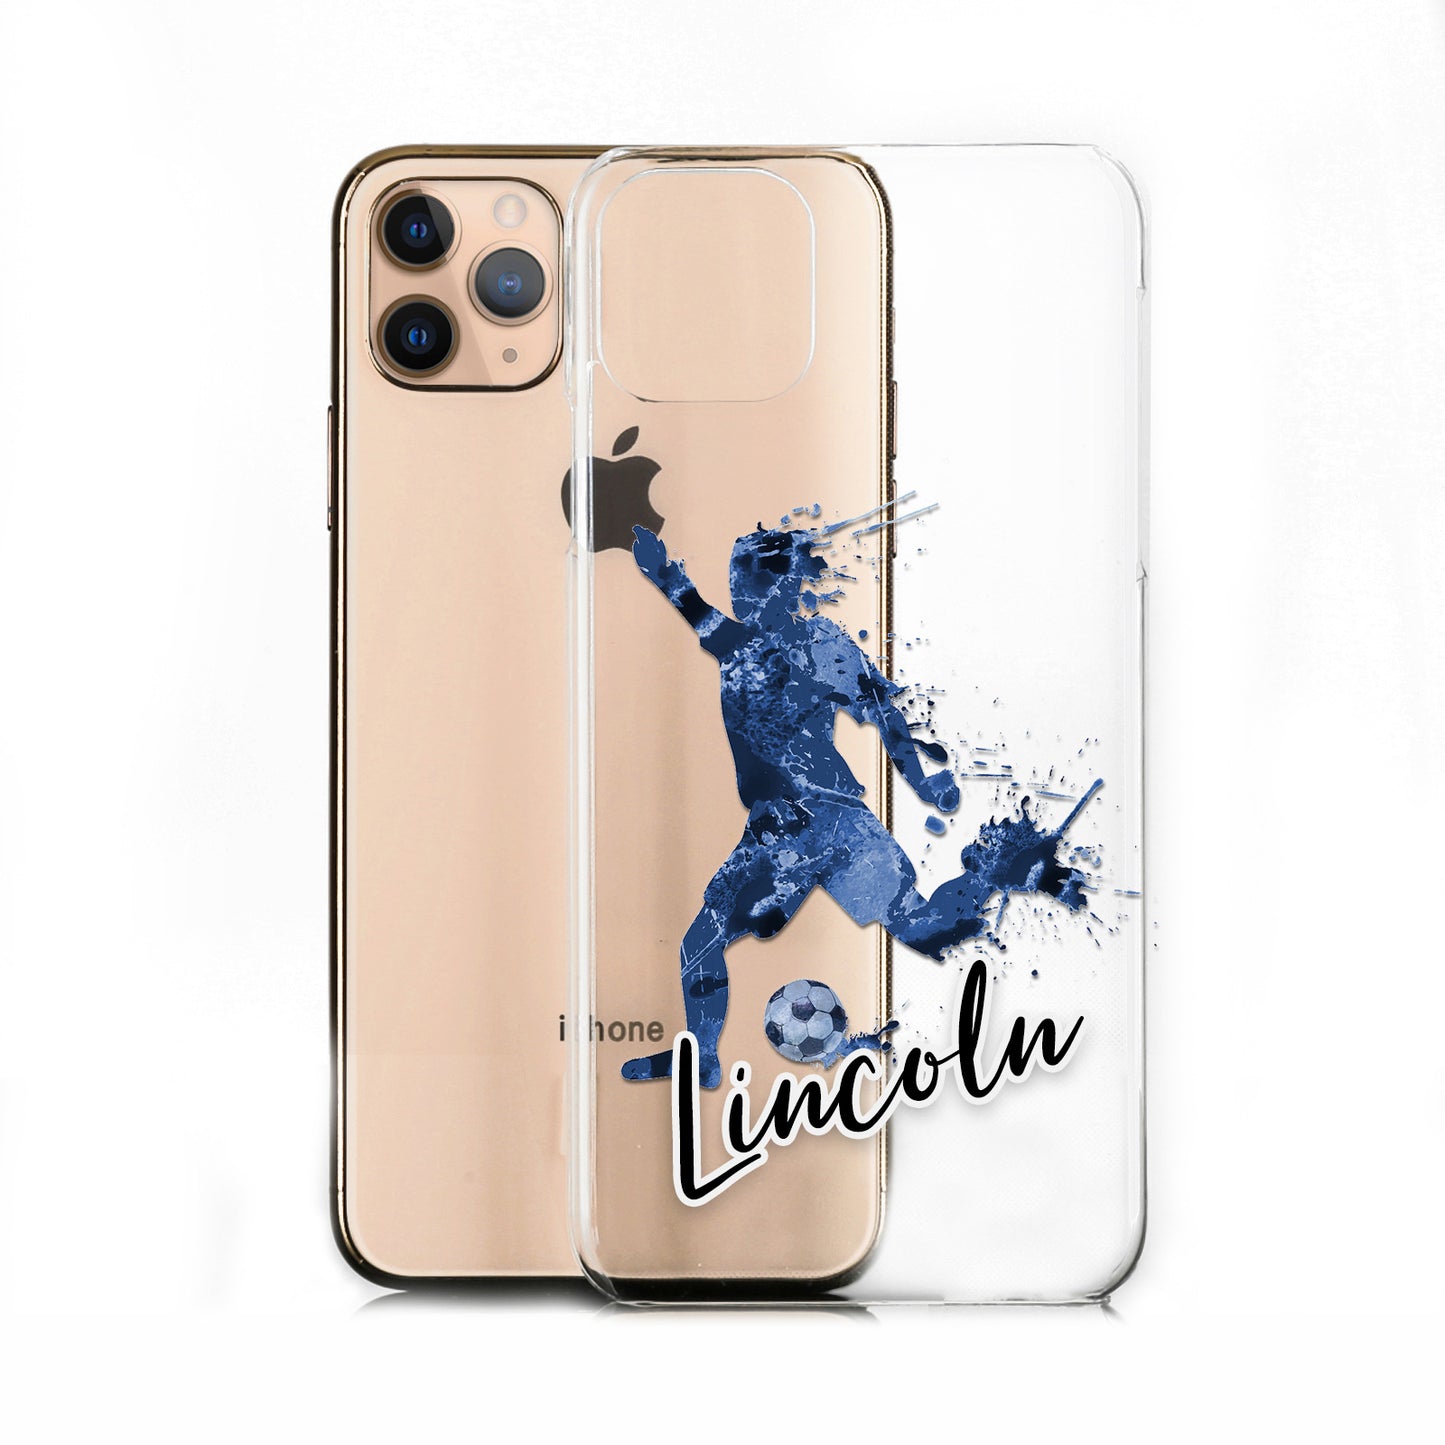 Personalised Oppo Phone Hard Case - Vivid Blue Football Star with White Outlined Text